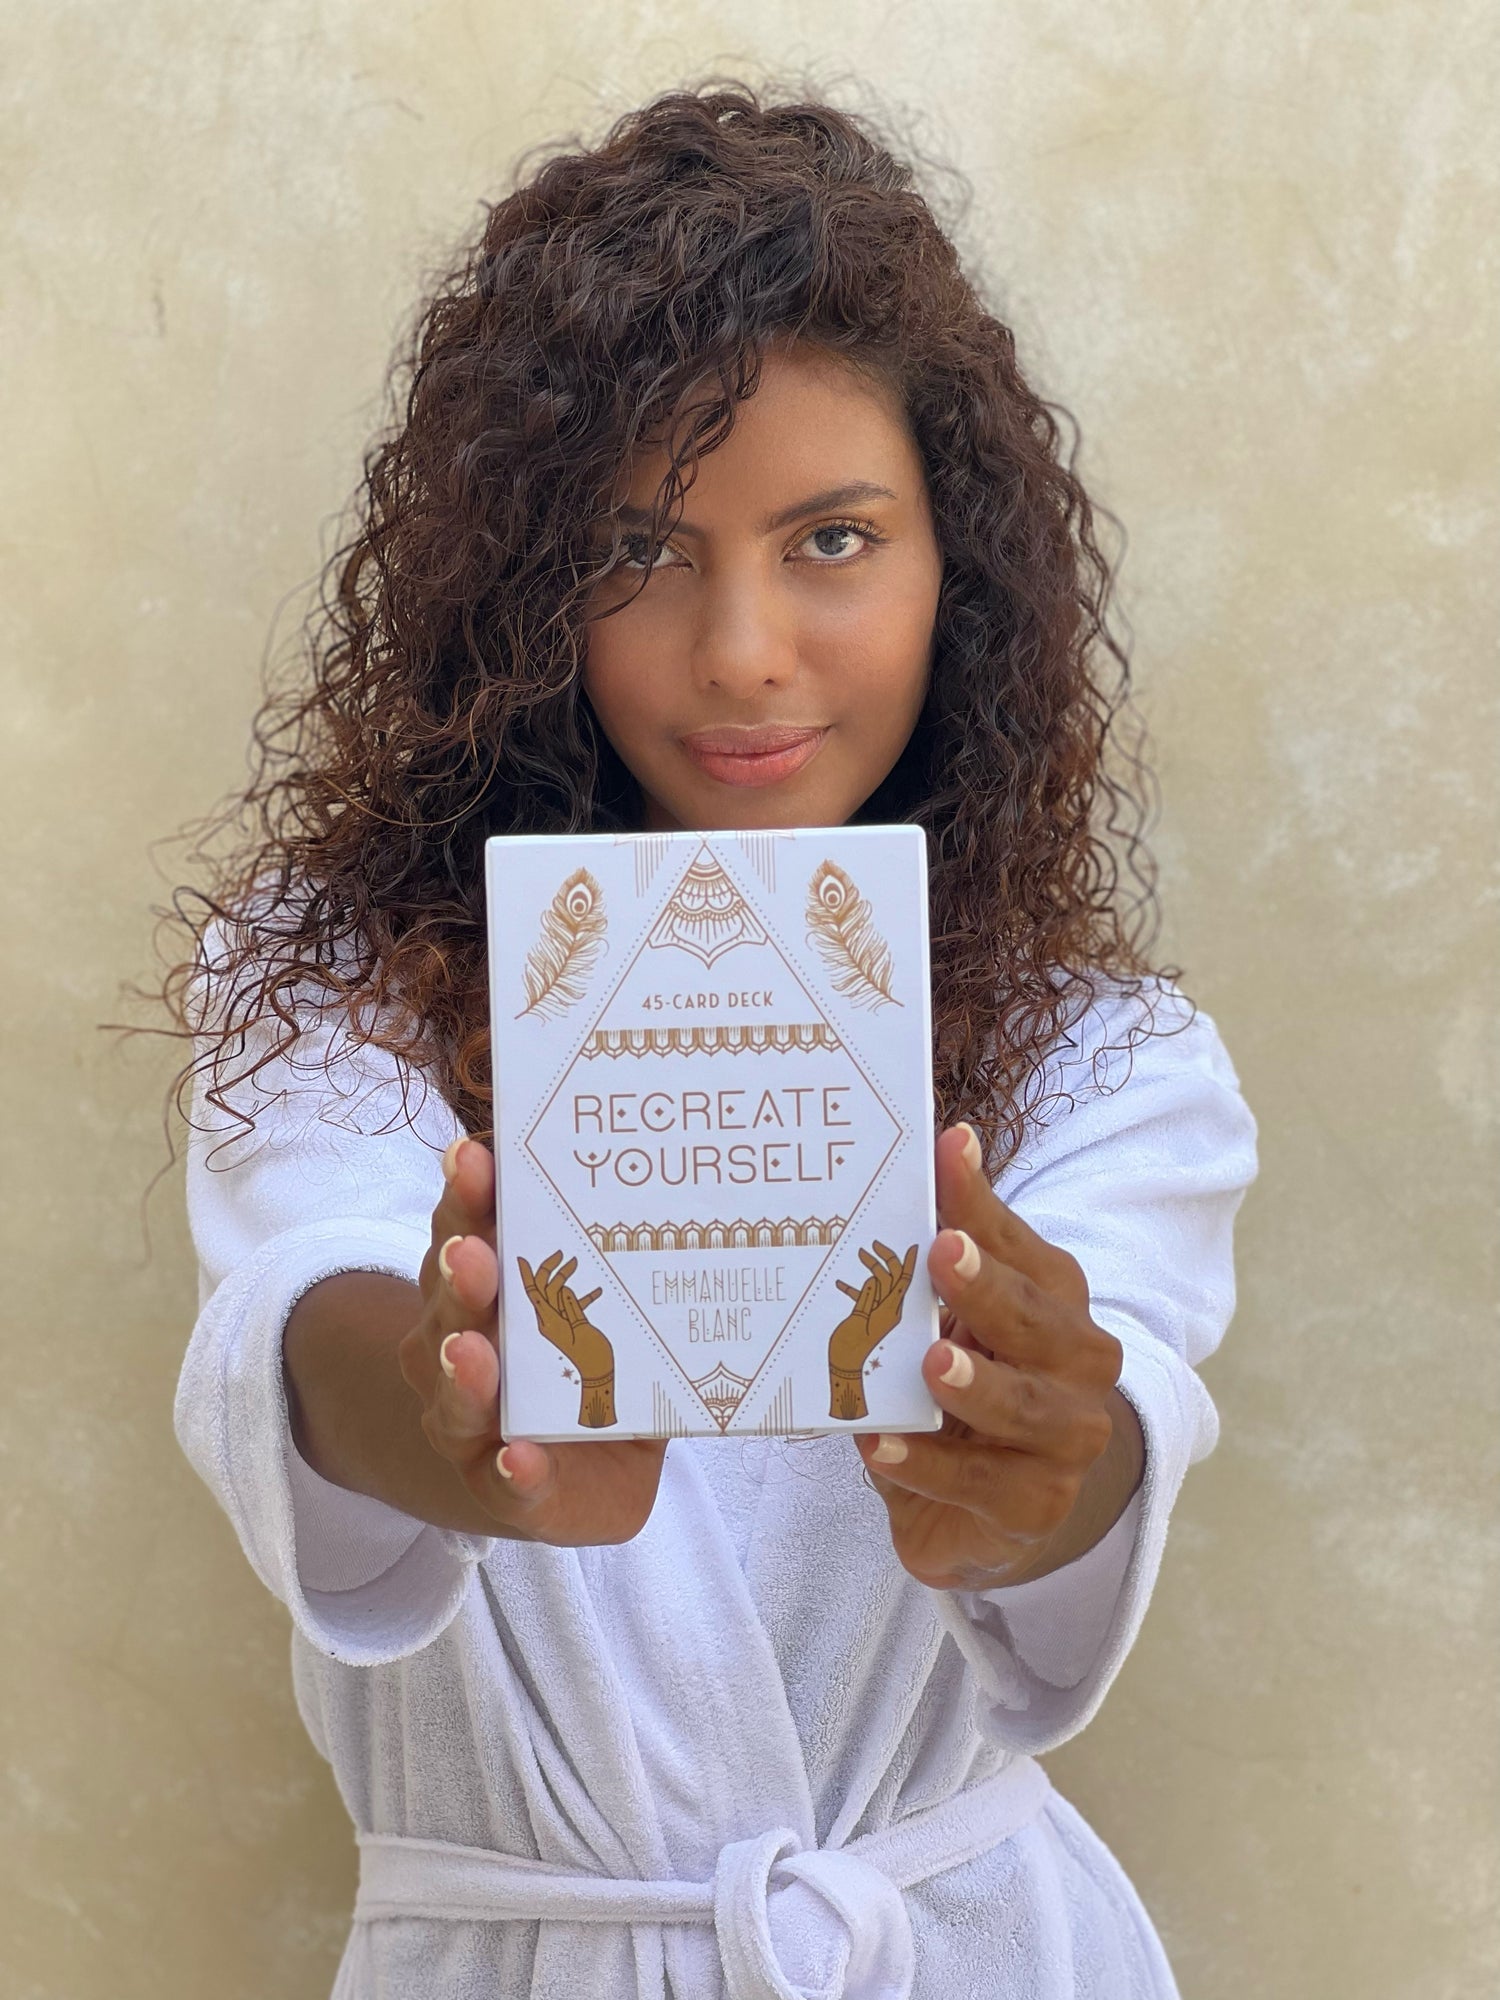 The Recreate Yourself deck is an essentials all-in-one tool for personal growth and self-discovery for those who want to embark on a transformative journey.